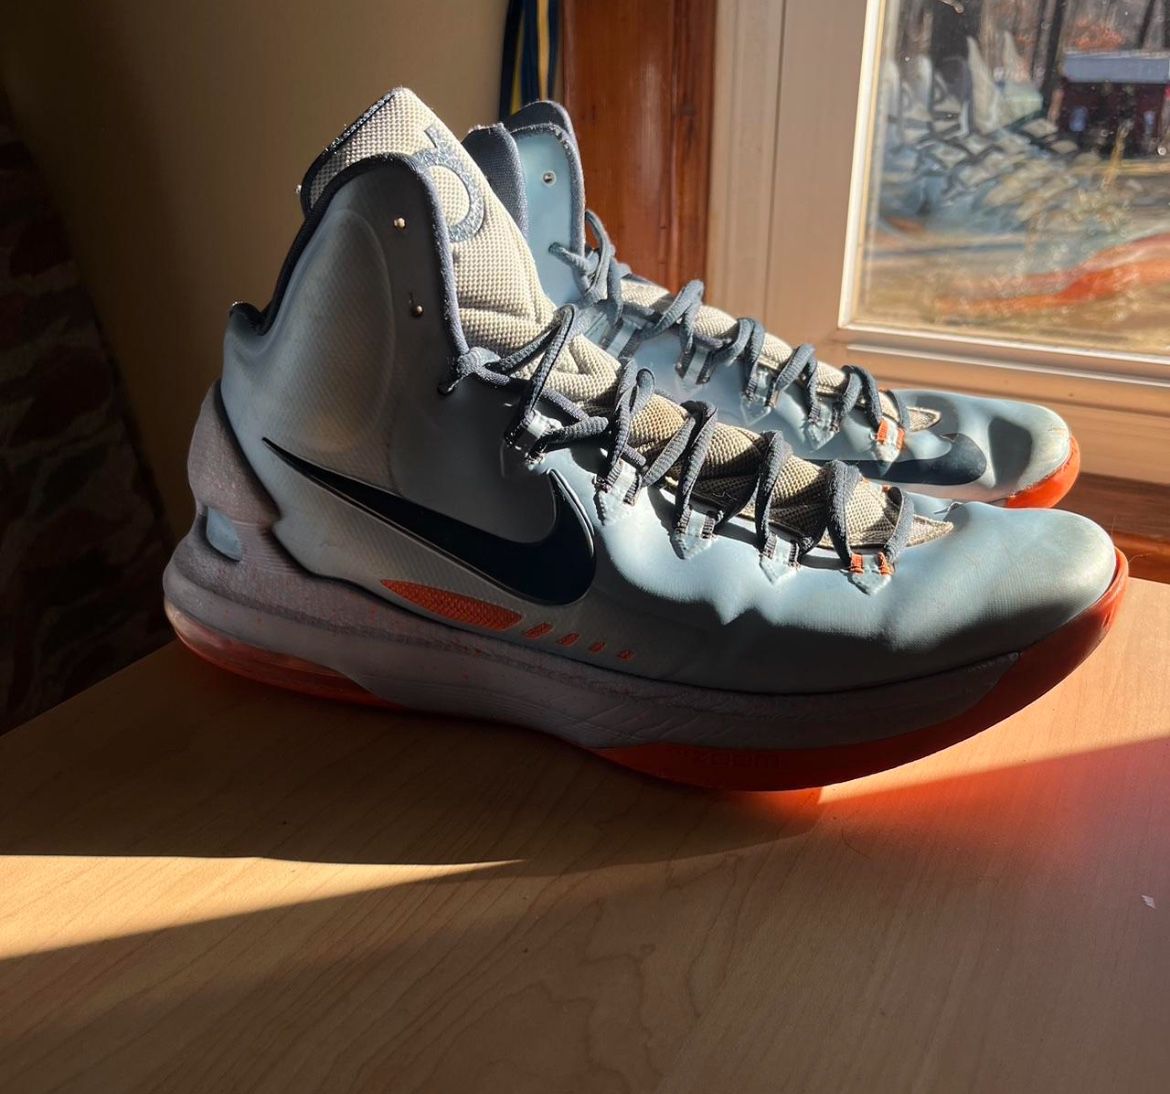 Kd 5 Ice Blue 2012 Squadron Orange Size 11 small paint chipping, small tears, small leather scuffs. Replacement box.